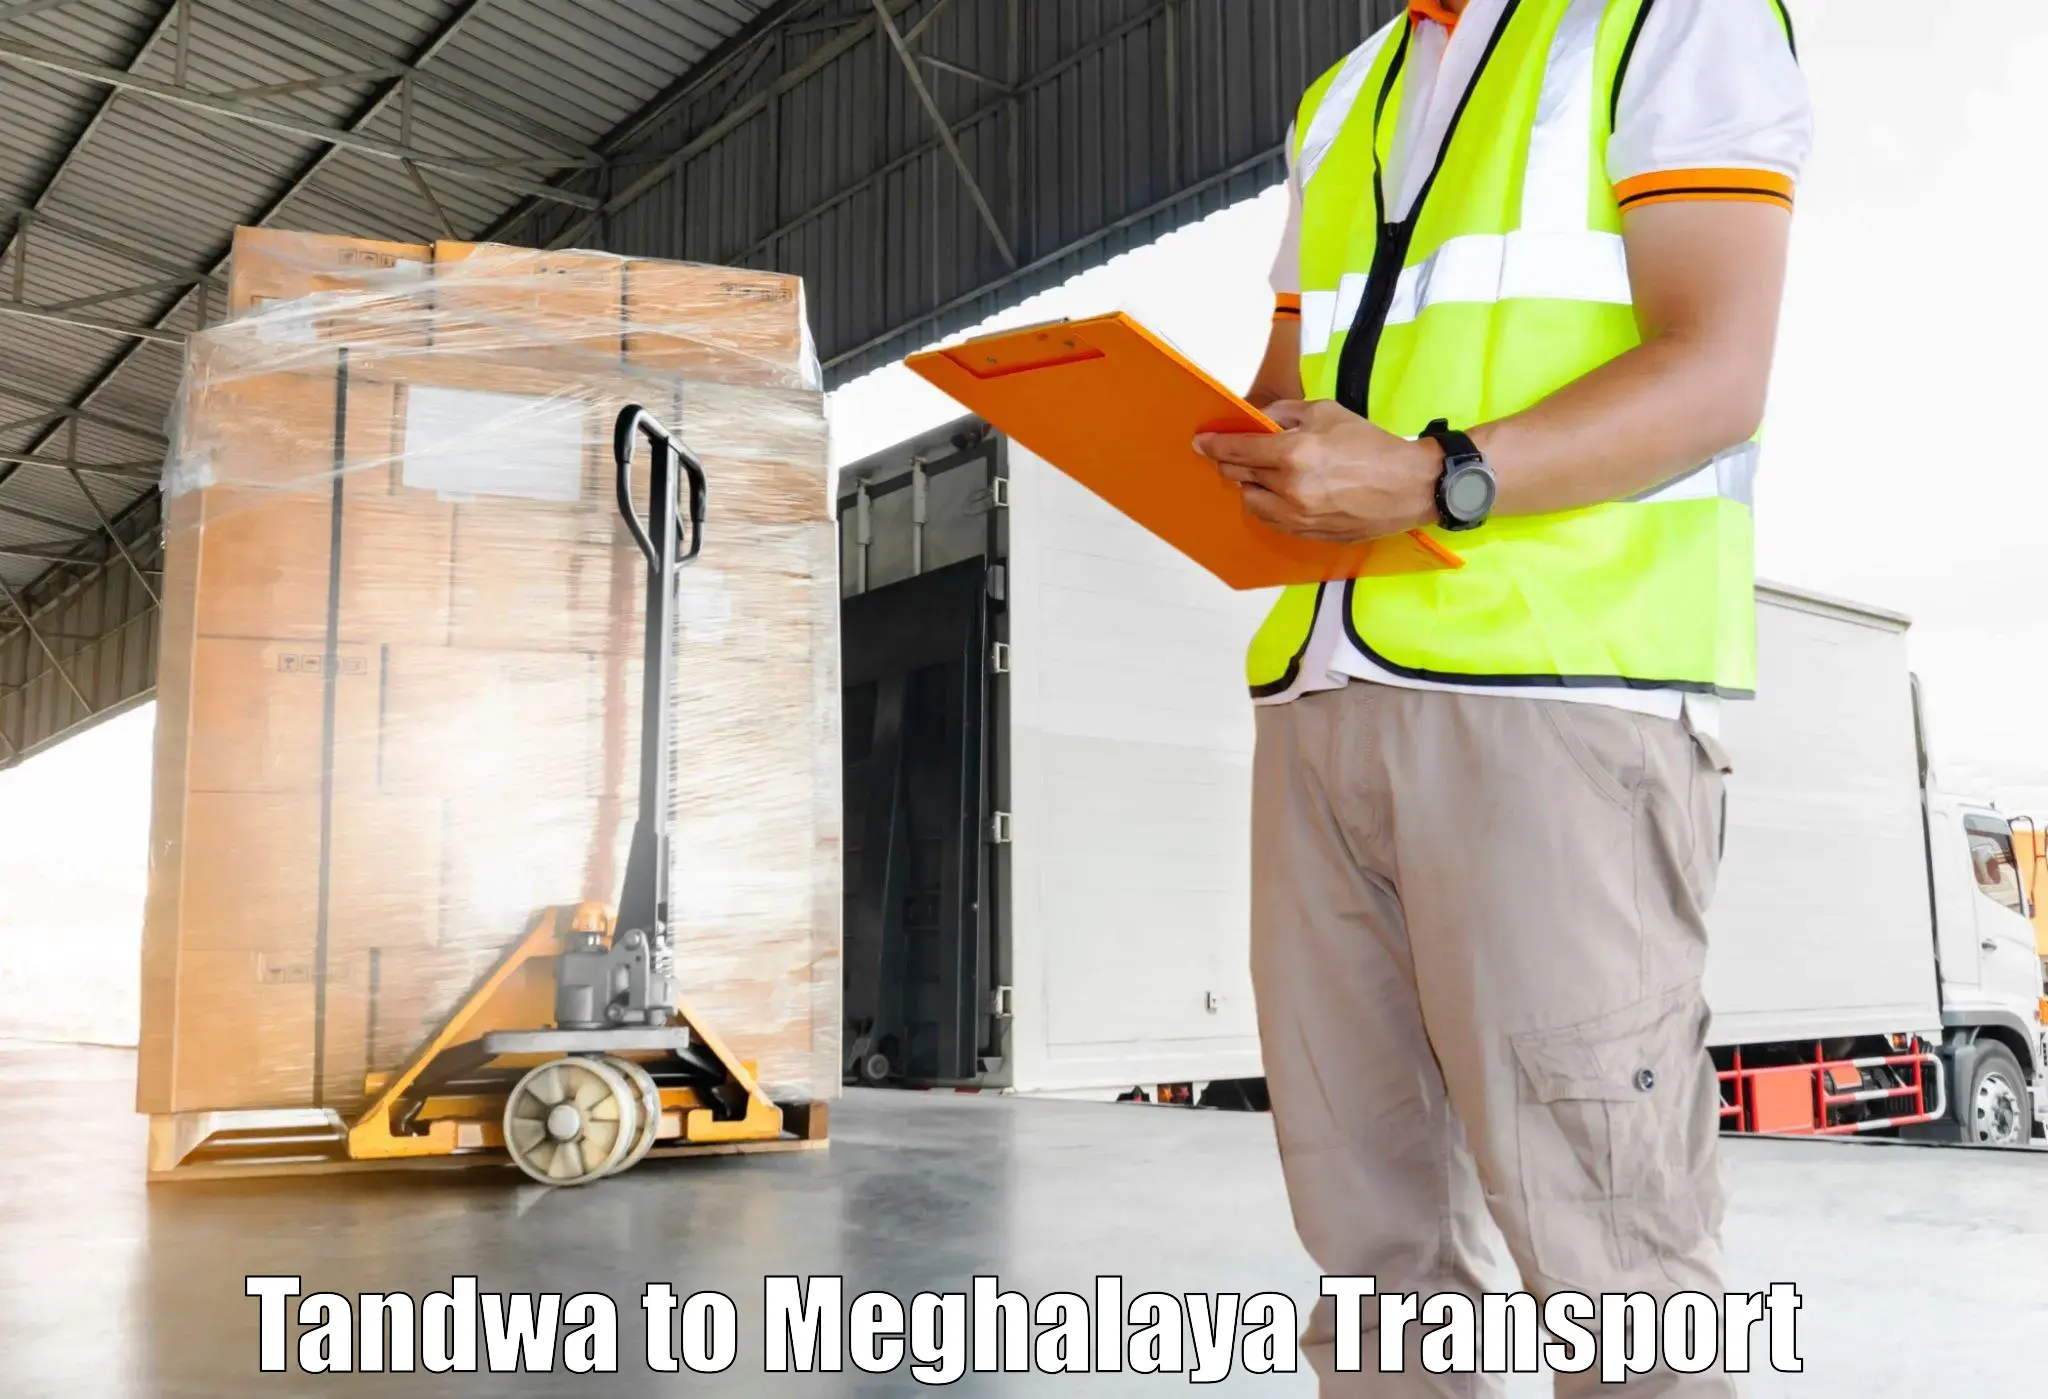 Scooty transport charges Tandwa to Meghalaya